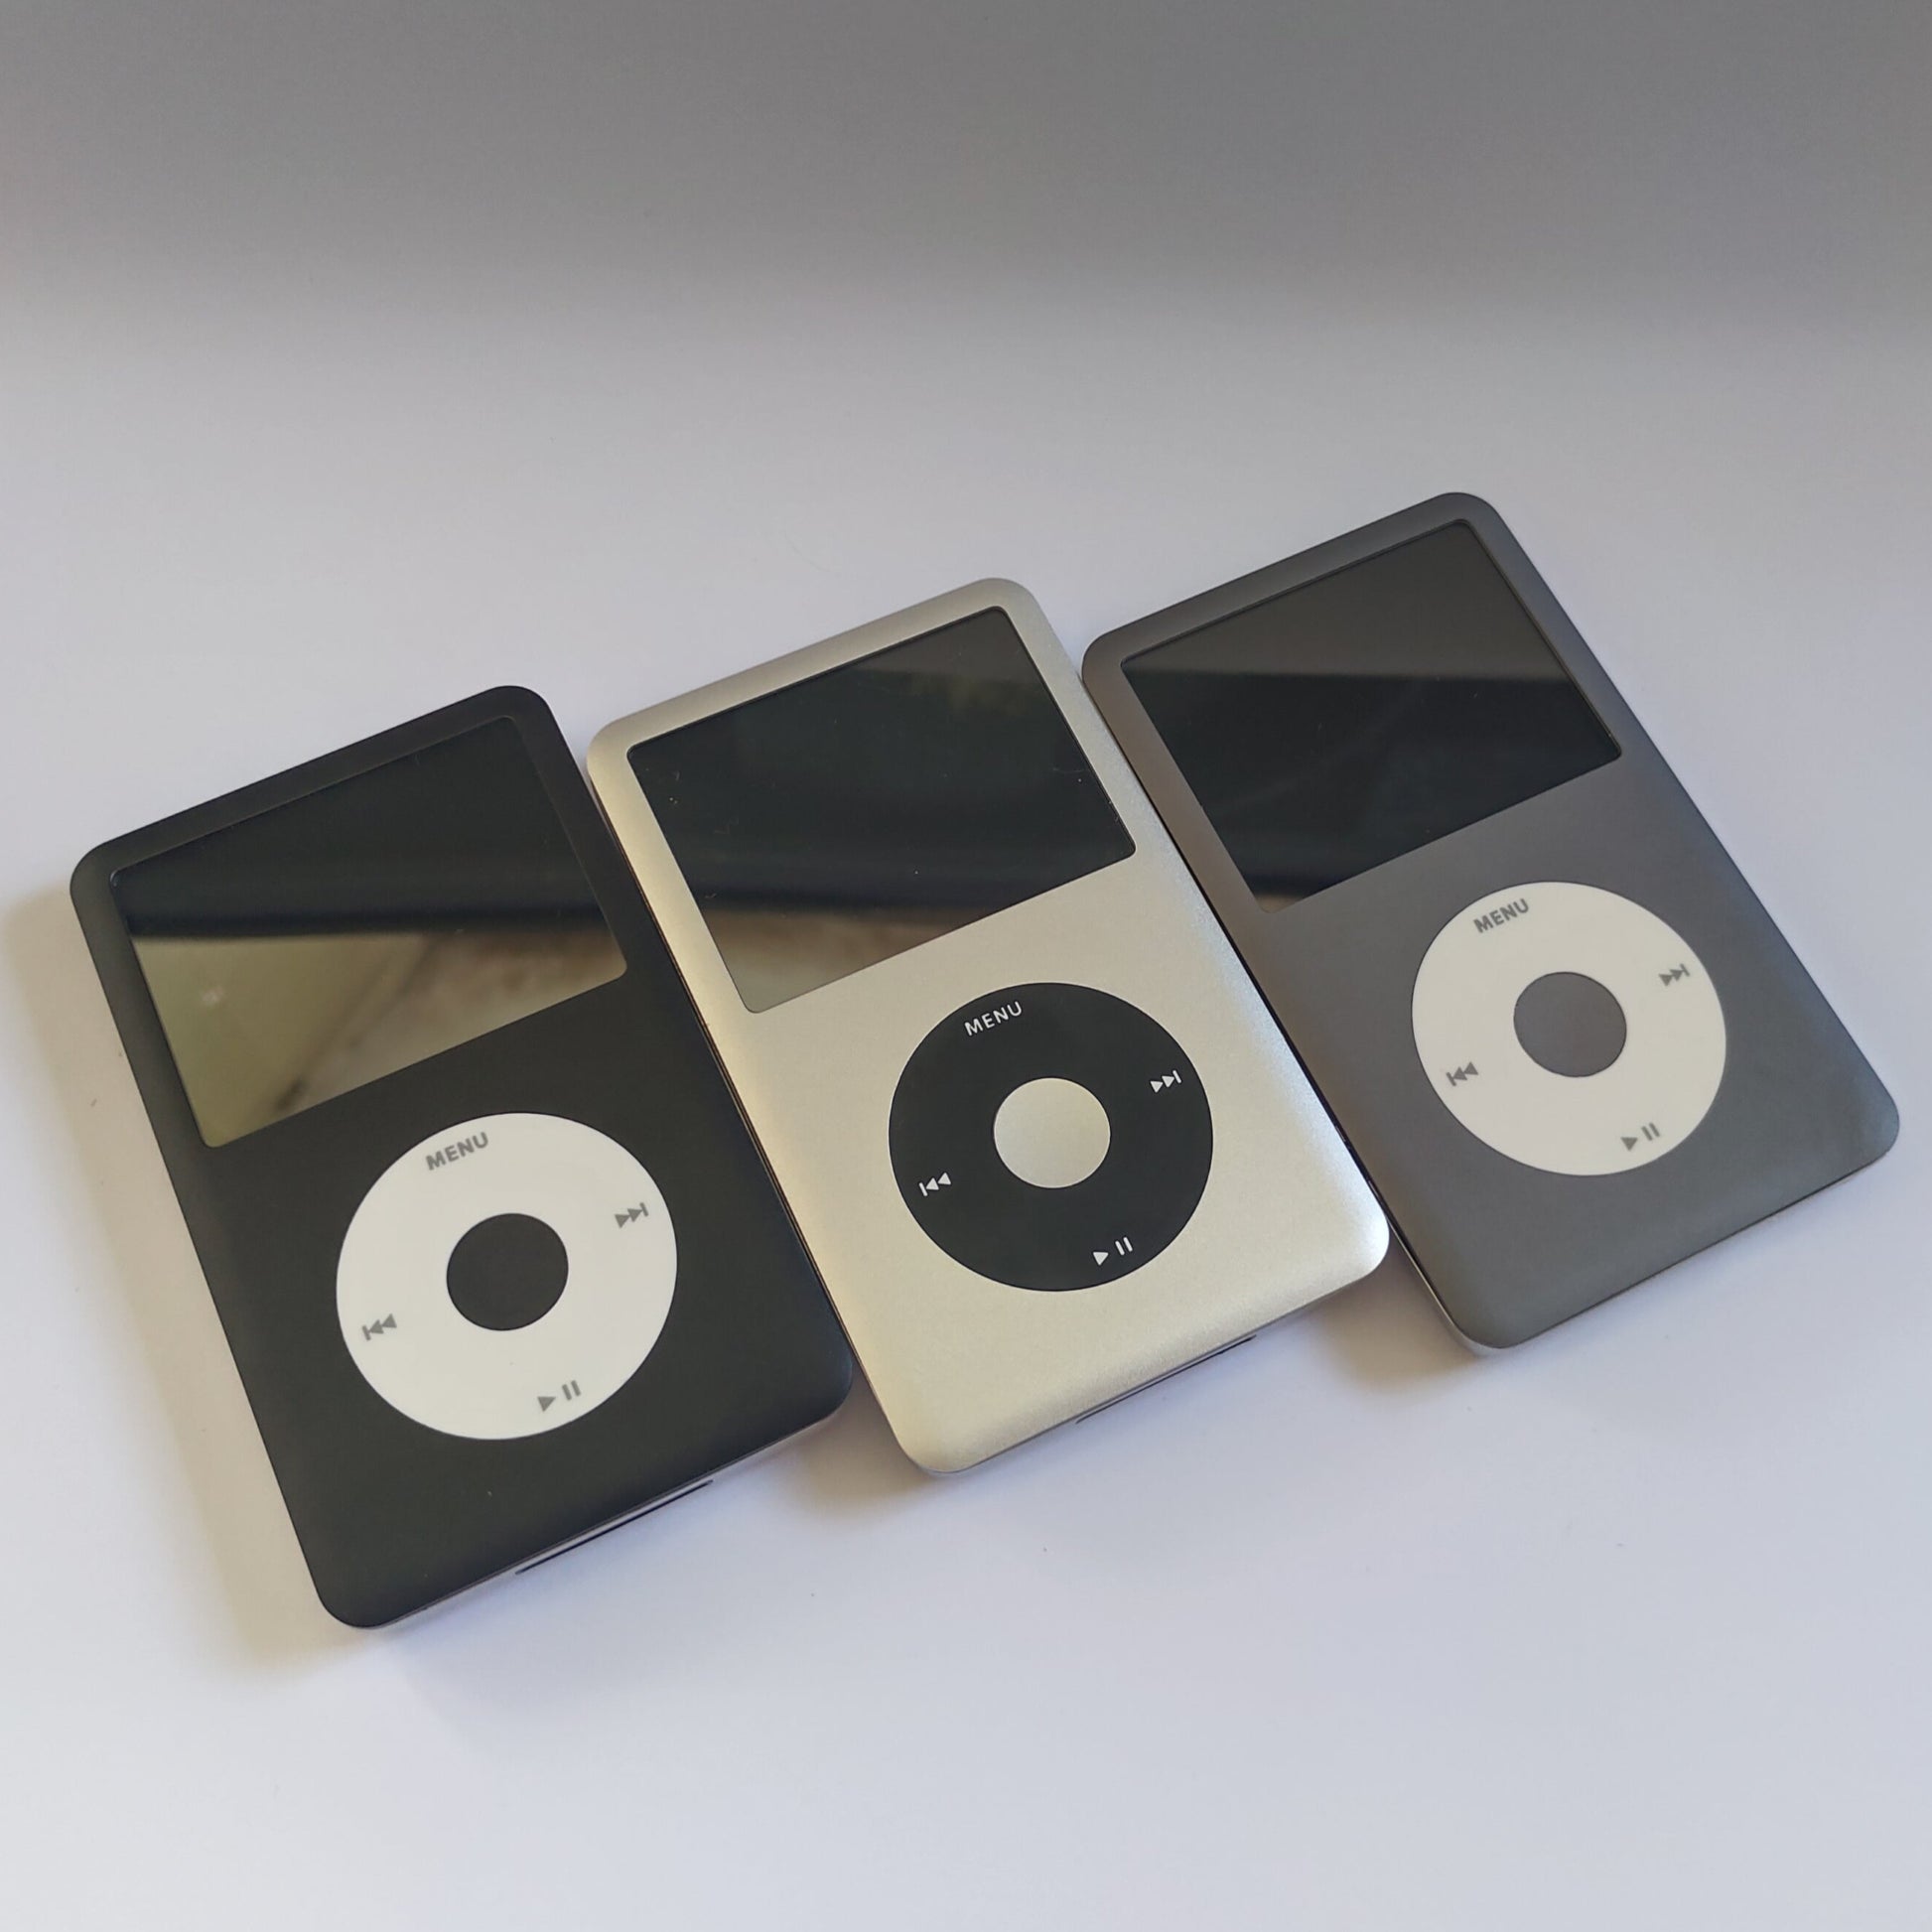 Custom iPod classic colour swapped options - black and white, silver and black, grey and white